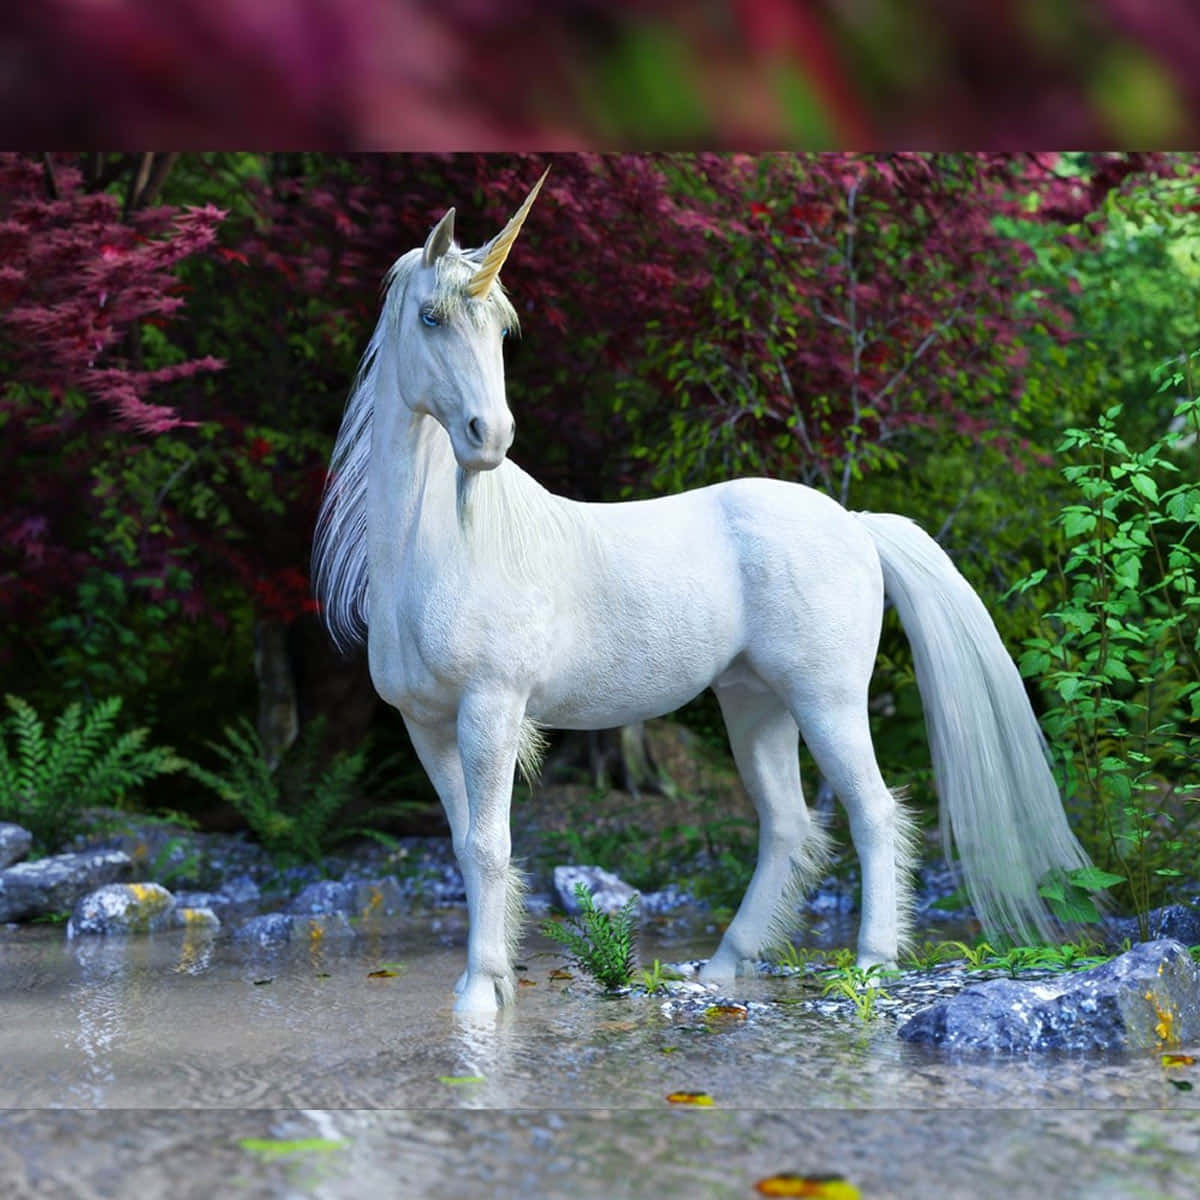 Unicorn Standing In A Garden Picture